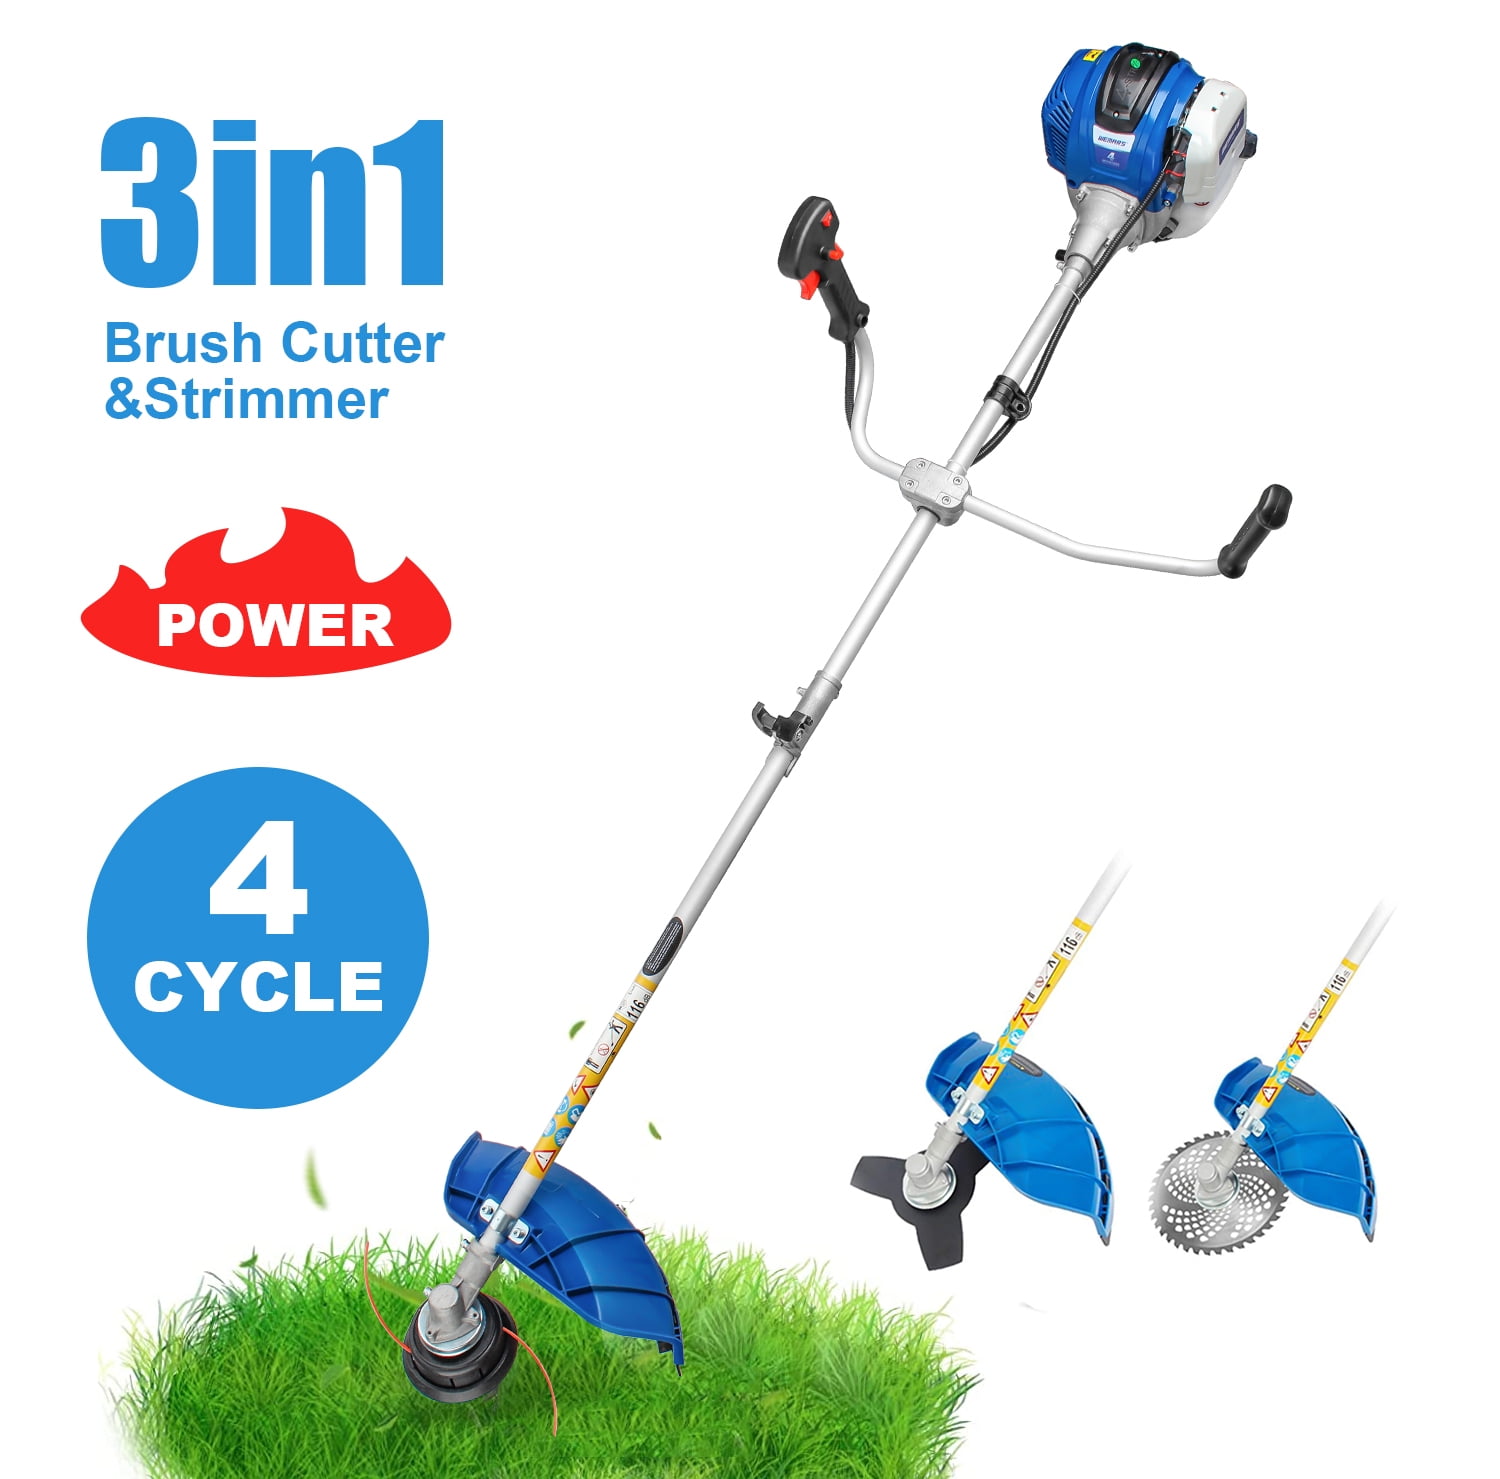 Straight Shaft Trimmer Gas Weed Eater Commercial Brush Cutter Free Harness 26cc